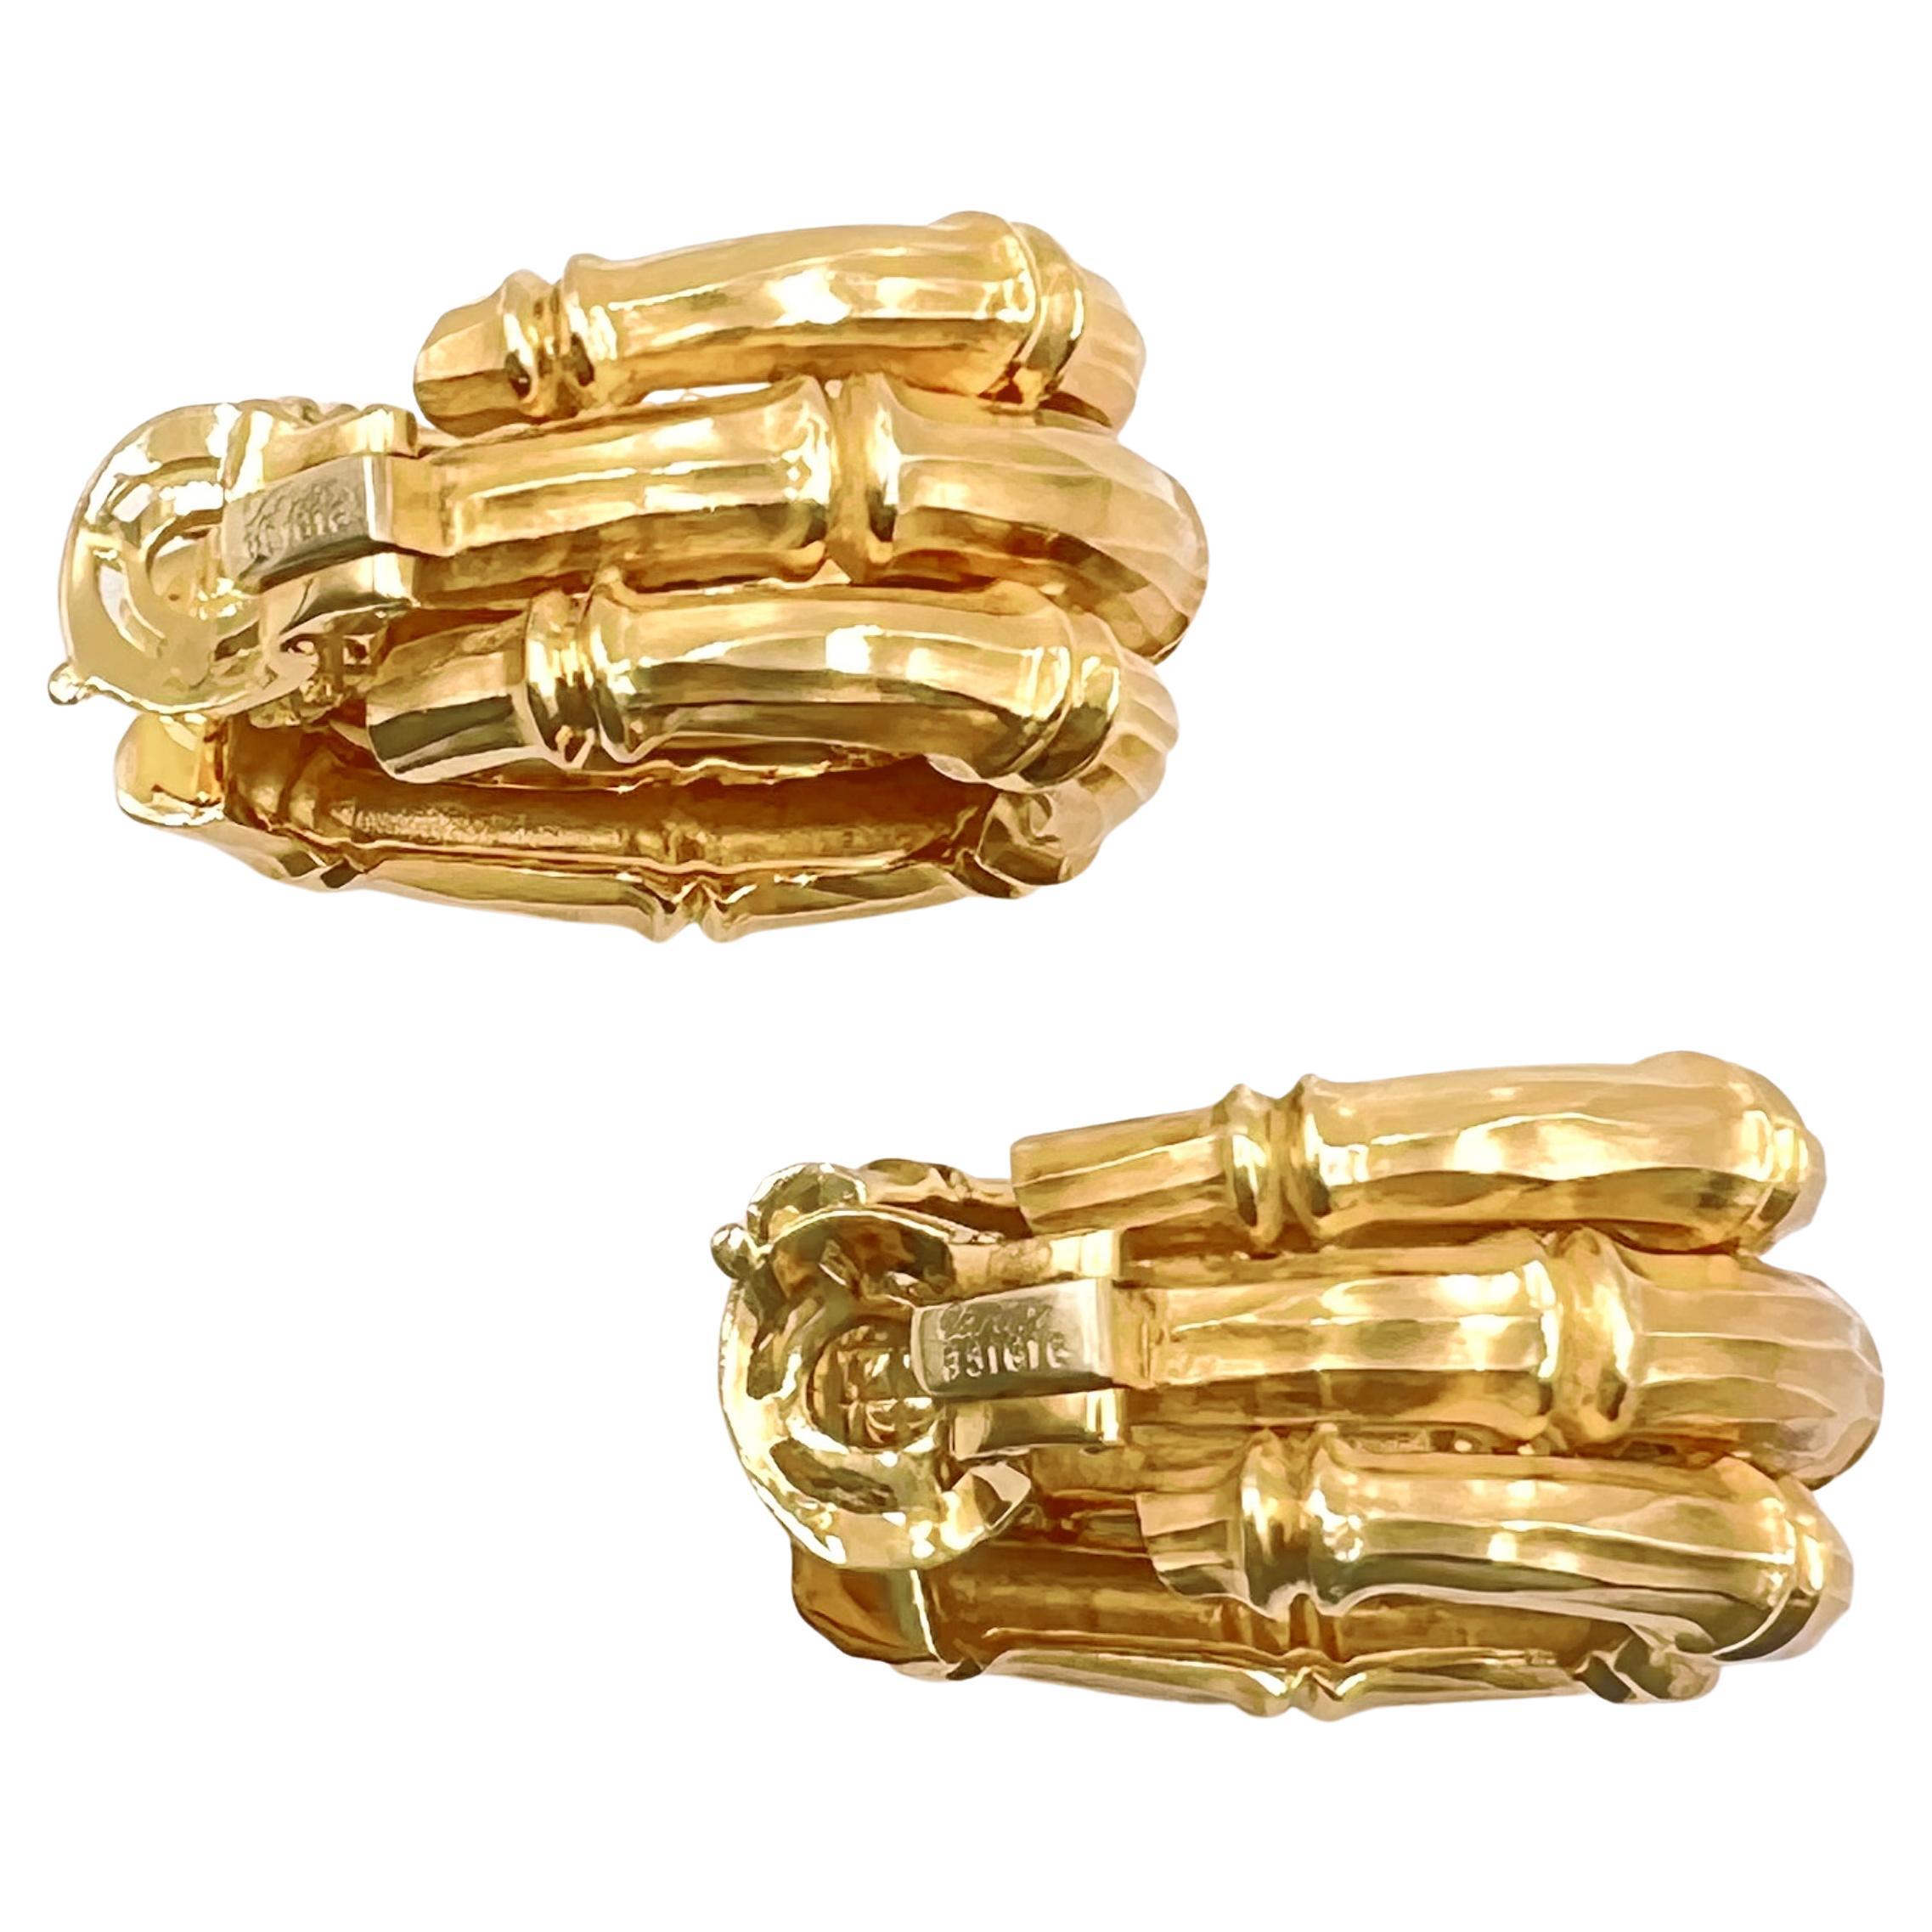 Large half-hoop earrings, designed as three vertical rows of bamboo stalks in matte-finished 18 yellow gold.  Hinged clip backs.  Signed 'Cartier' with serial number and French gold mark  Circa 1978.  Earring dimensions: 1.5